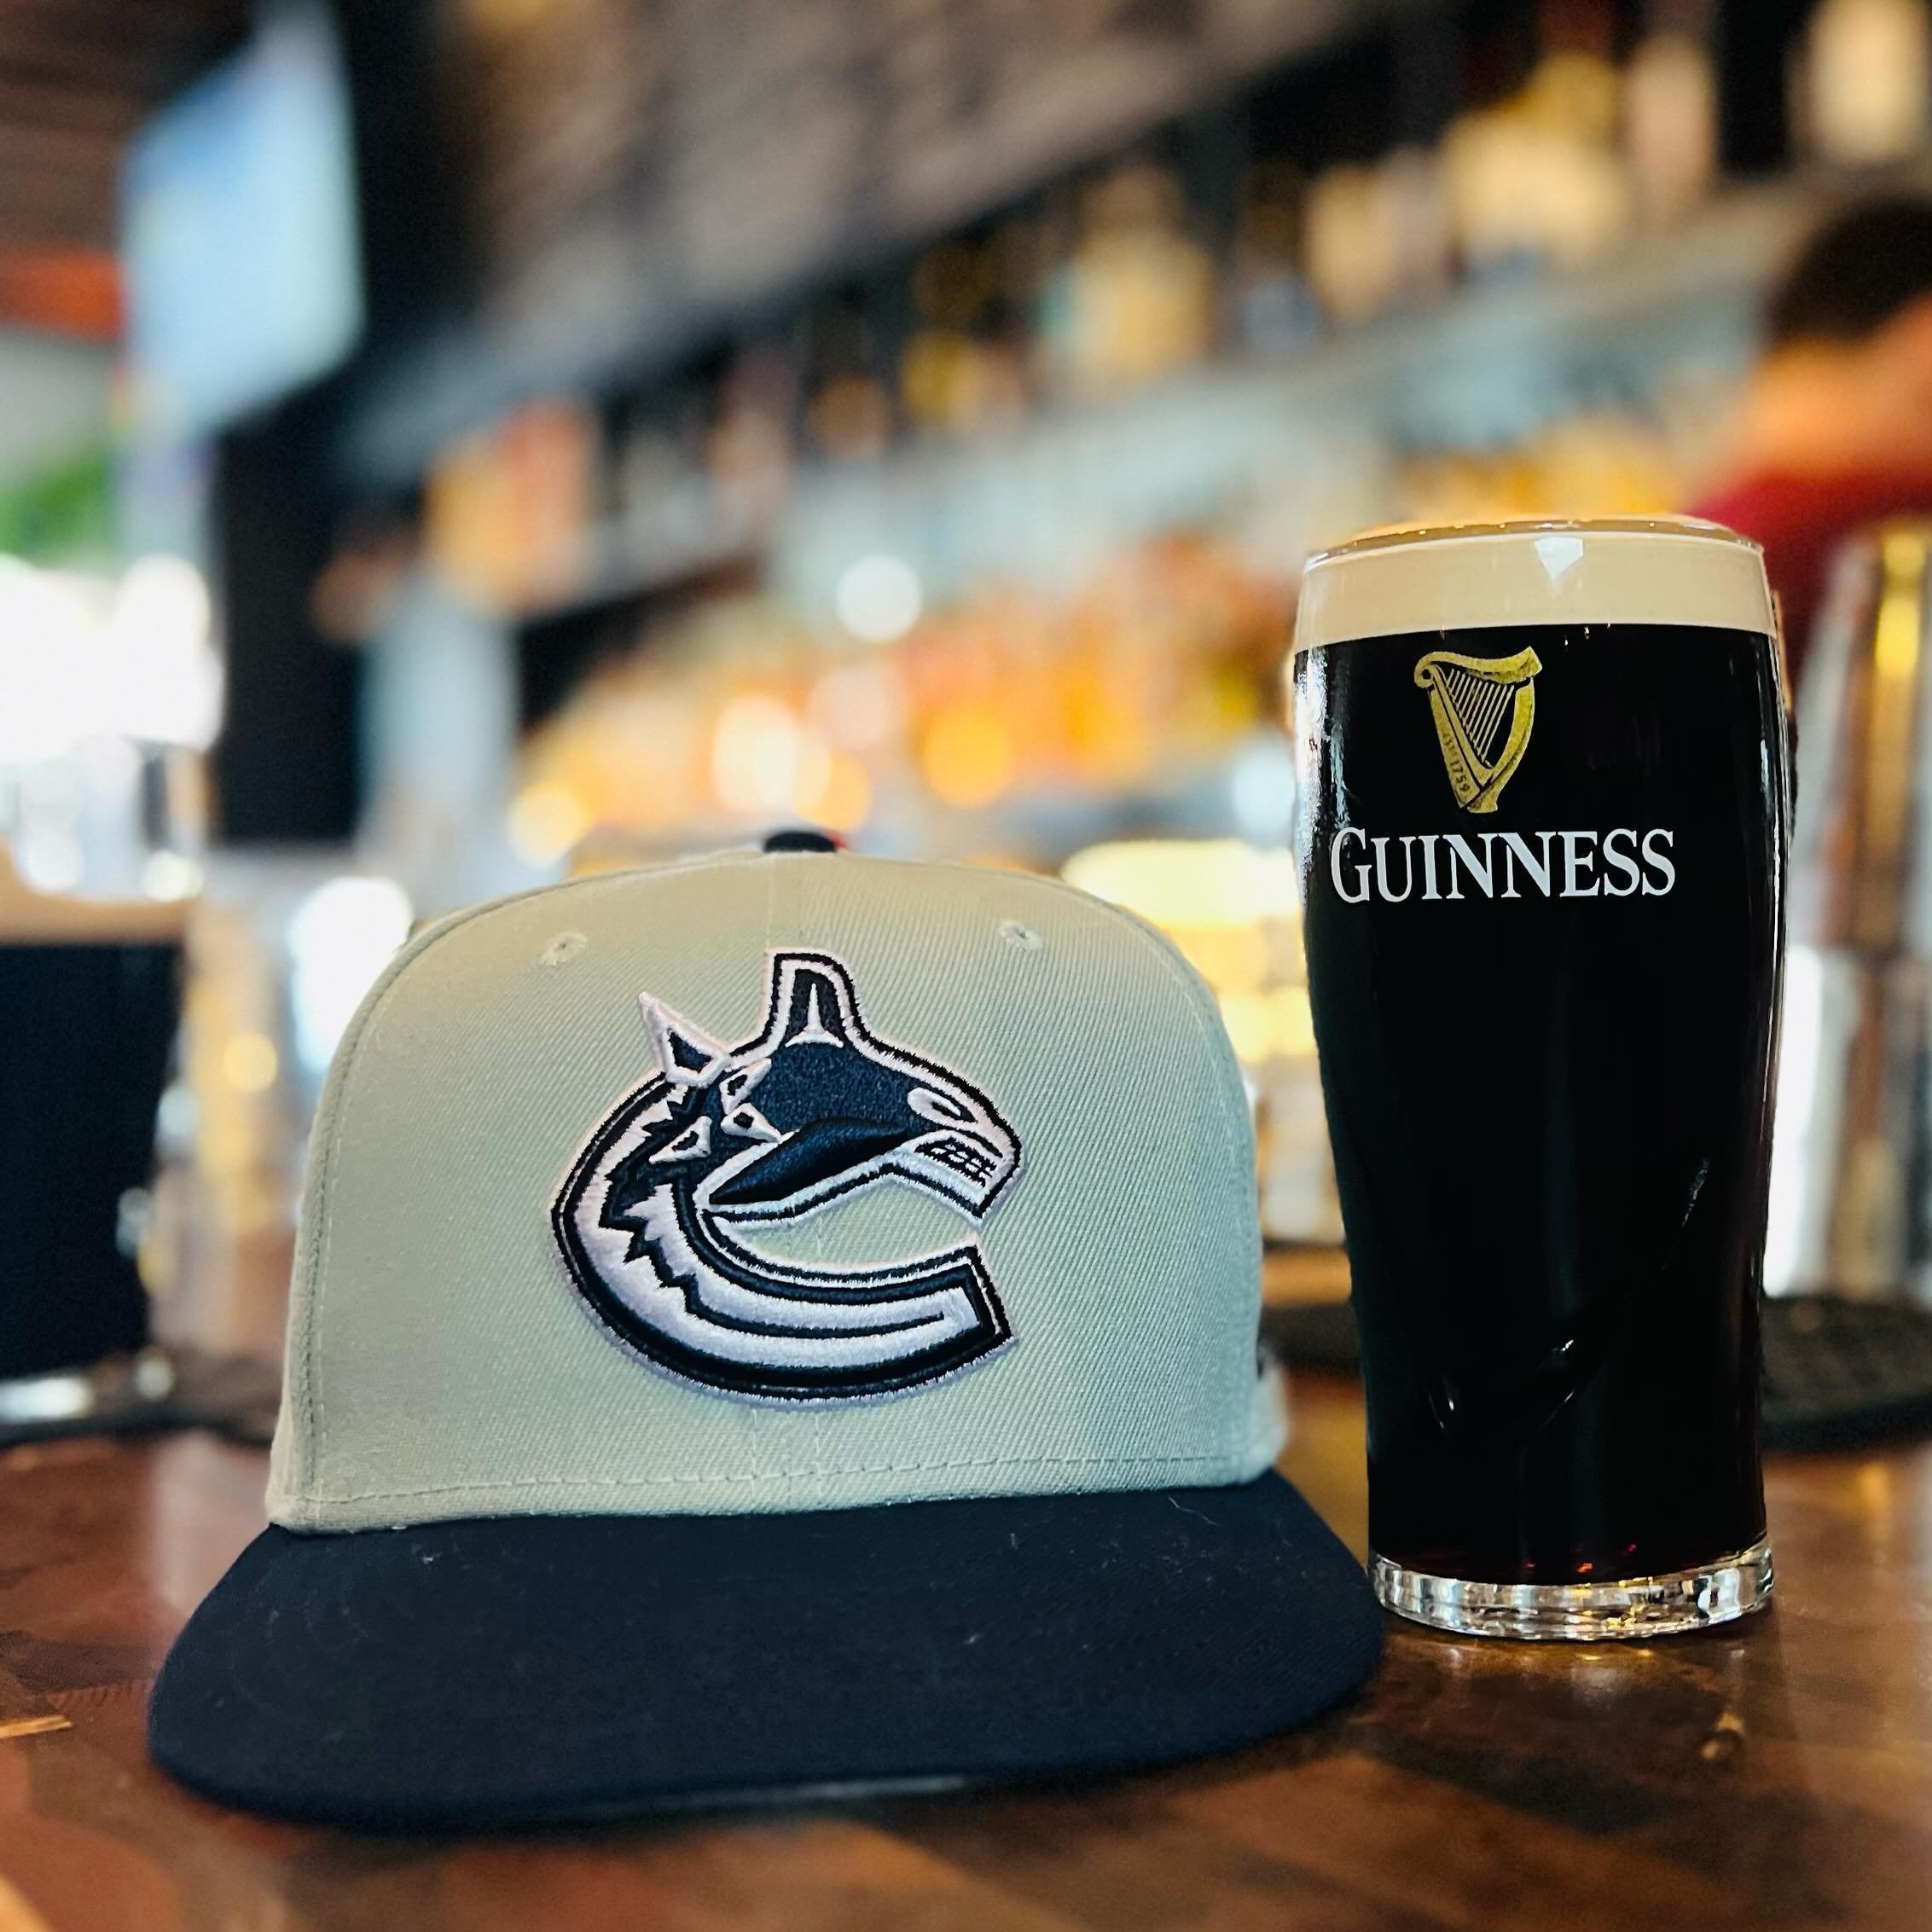 HATS OFF

Round Two of the NHL playoffs starring our own @canucks kicks off tomorrow at 7 p.m. with Game One against Edmonton!

Throughout the run, we&rsquo;ll be offering Happy Hour food and drink features from 4 to 6 p.m. and Happy Hour drink featu